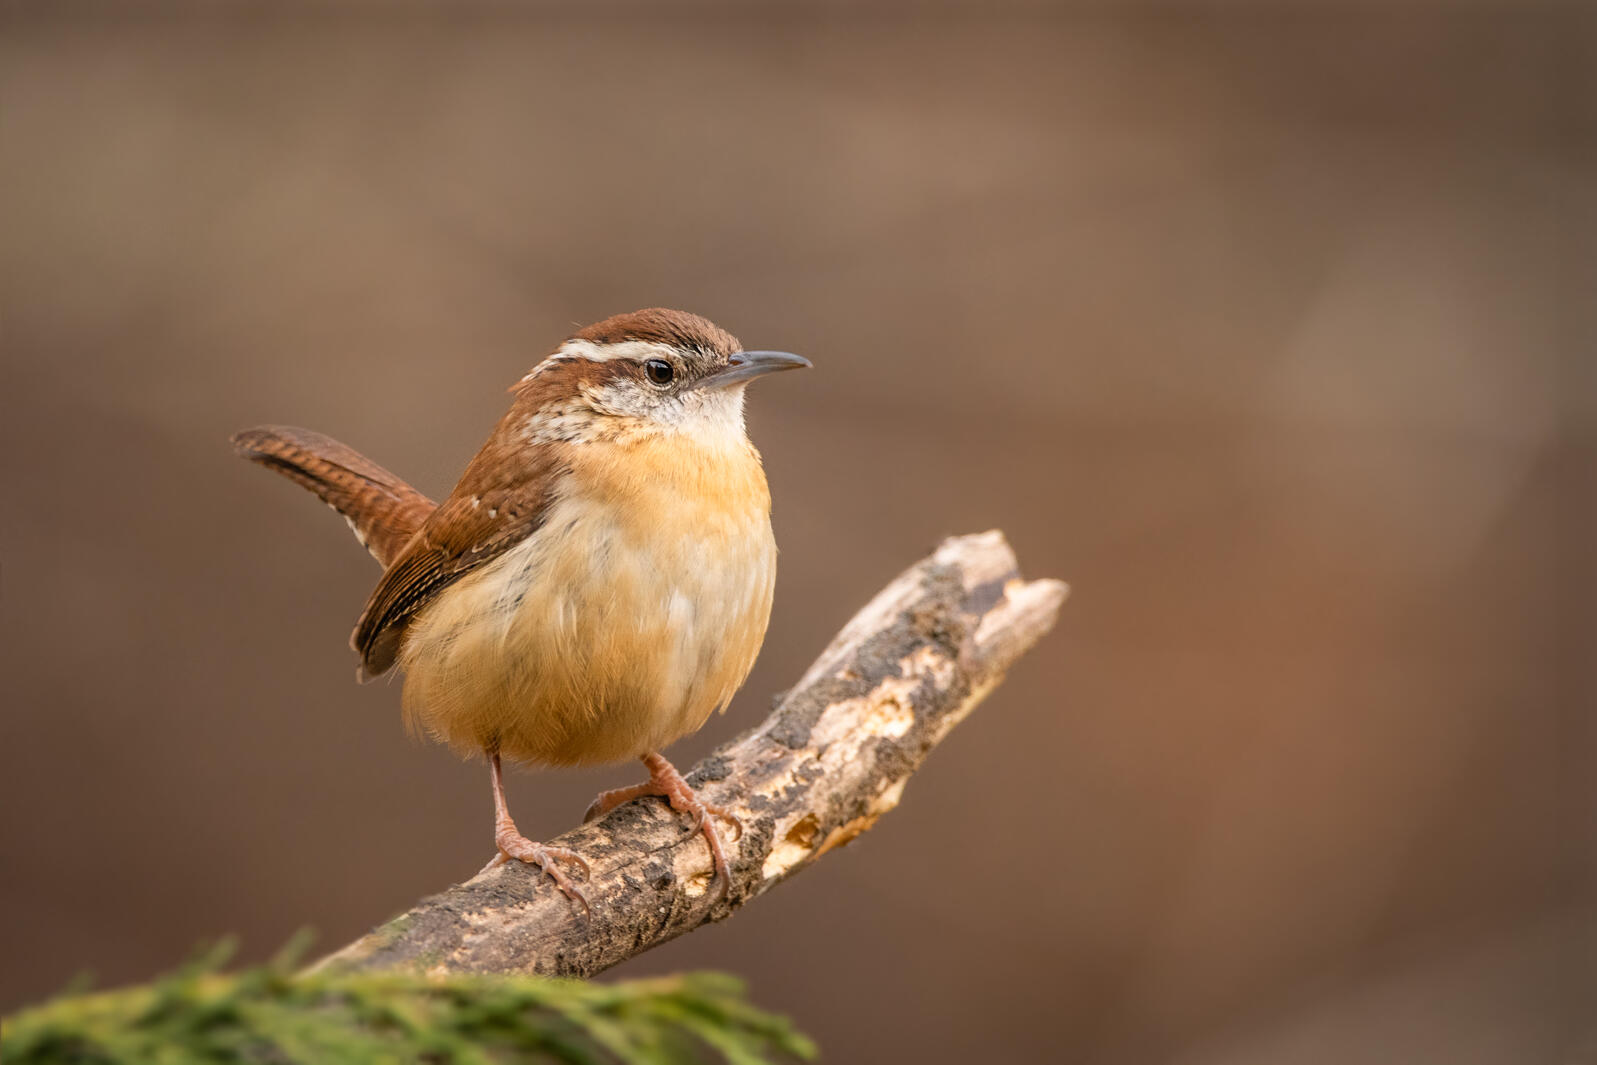 A Carolina Wren, a small round rusty brown bird sits perched and alert on a branch in a green forest